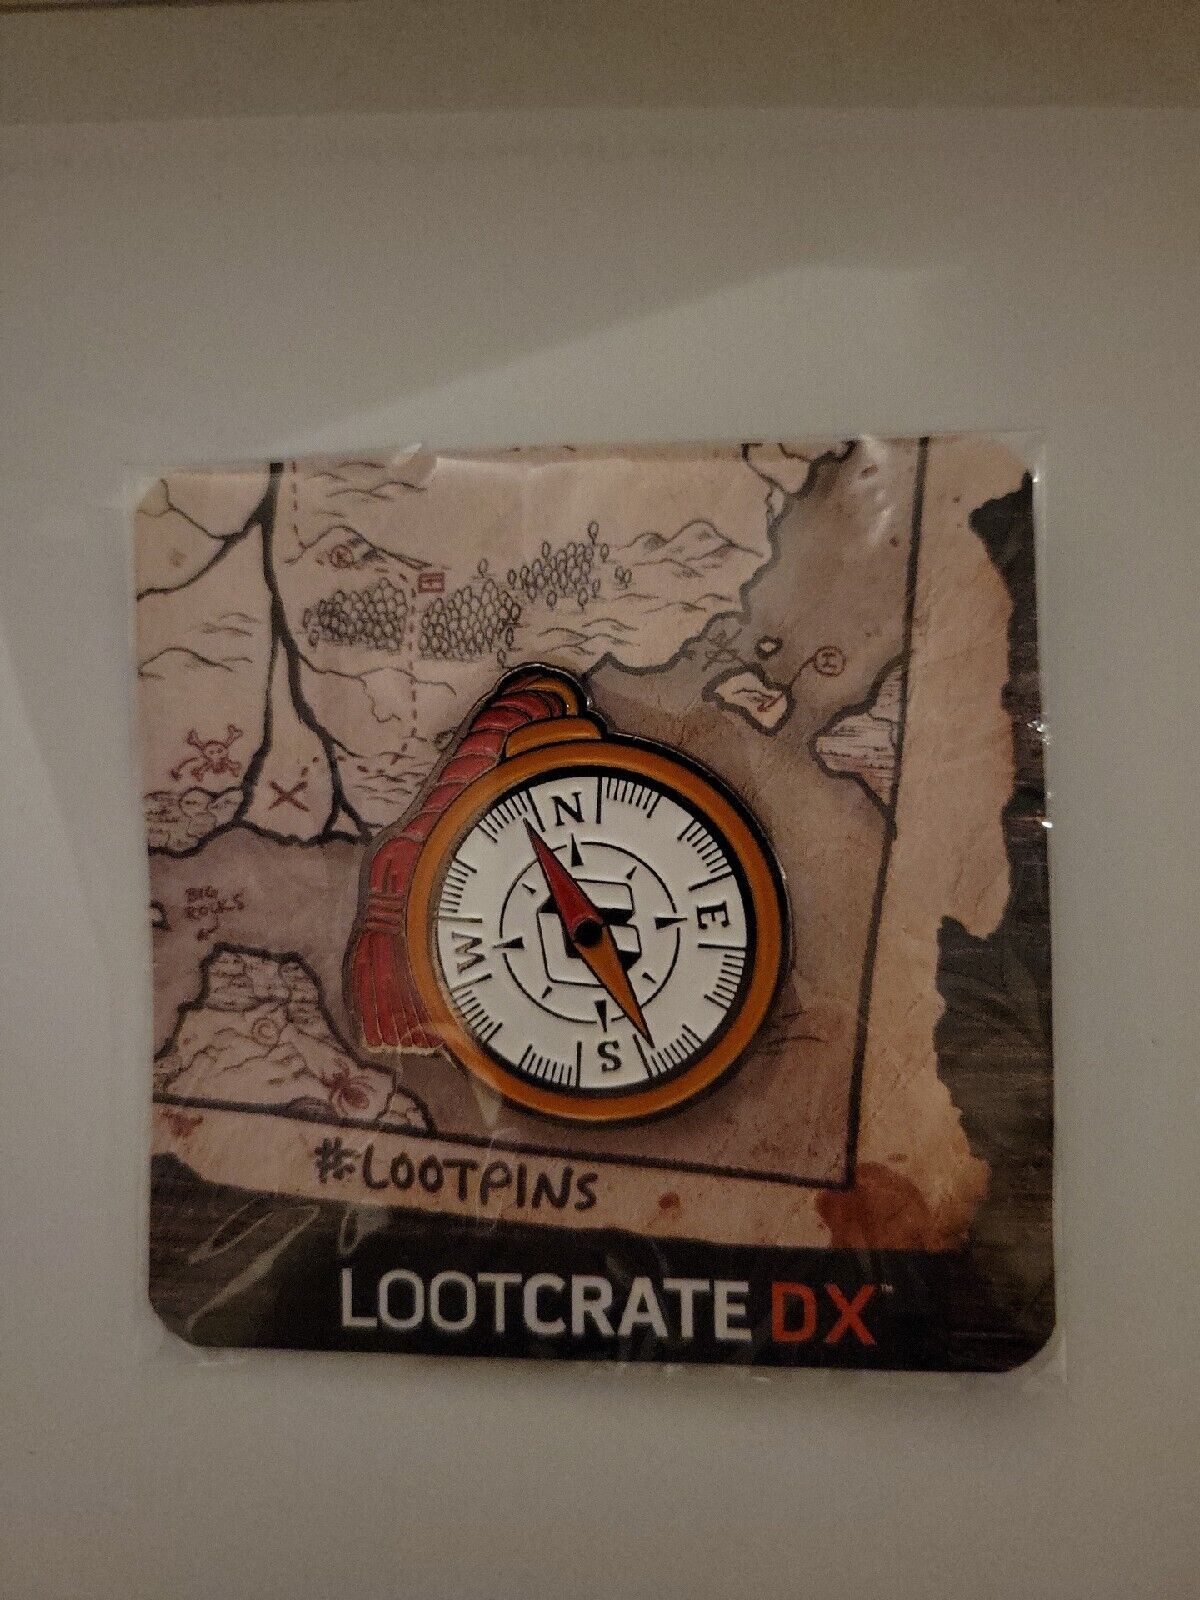 Compass Voyage Steampunk Pirate Classic Loot Crate DX Box Exclusive Enamel Pin